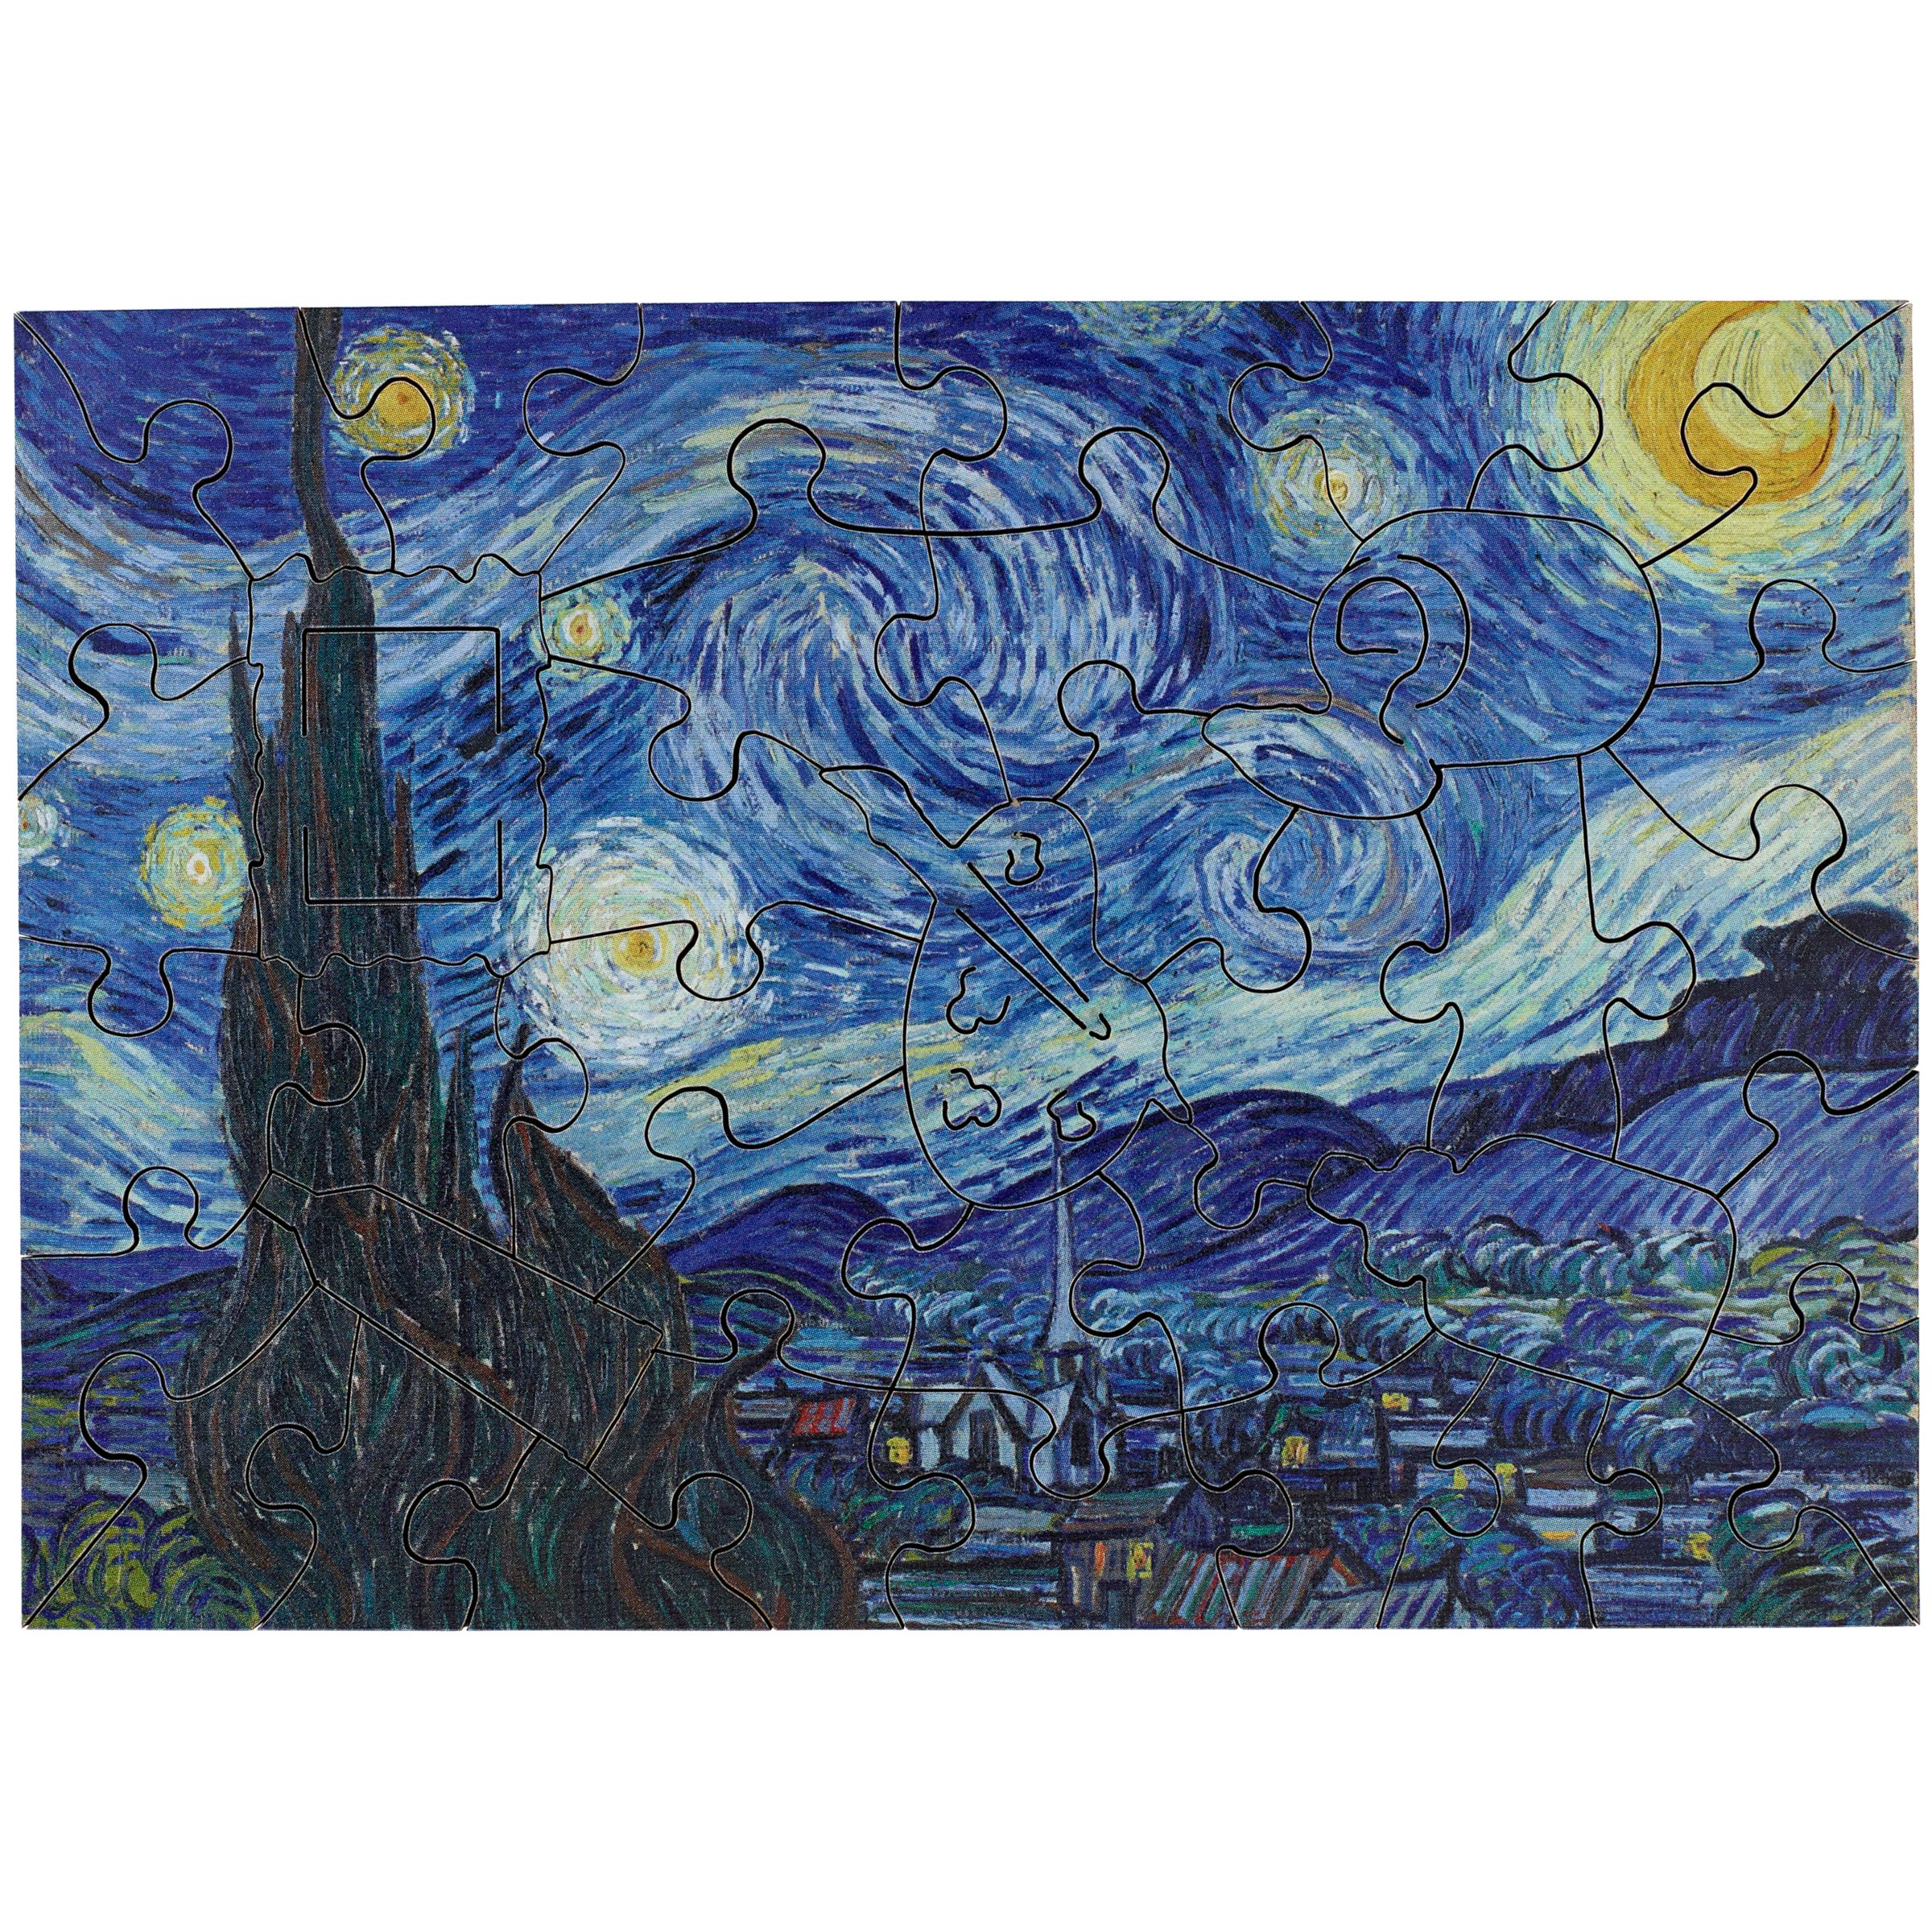 Wentworth Wooden Puzzles The Starry Night Jigsaw Puzzle, 40 pieces at ...